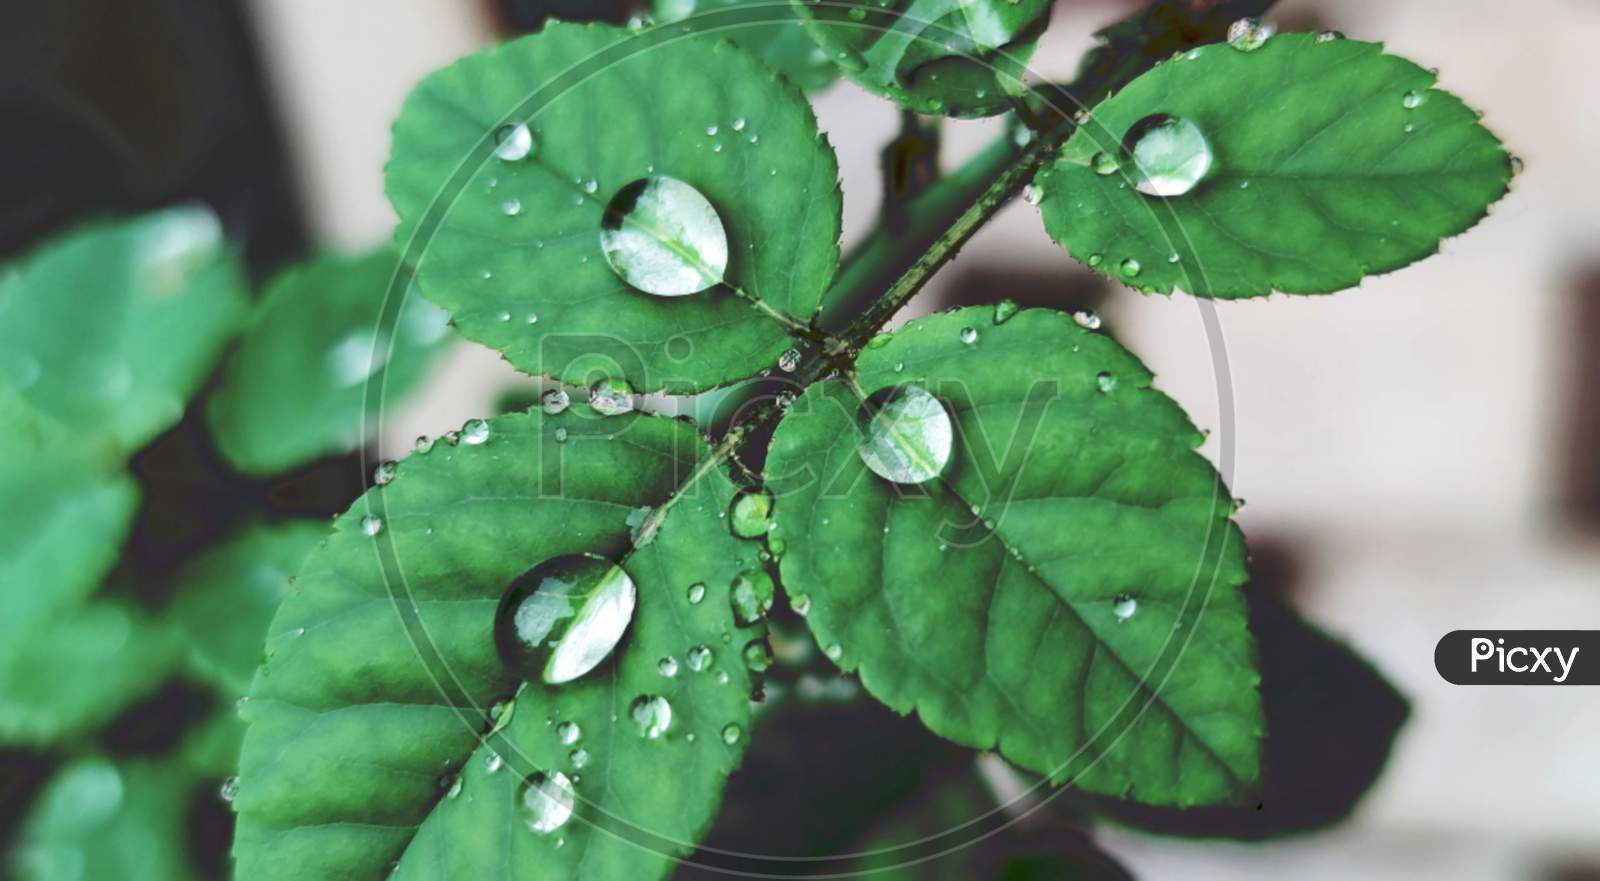 Water drops on rose leaves